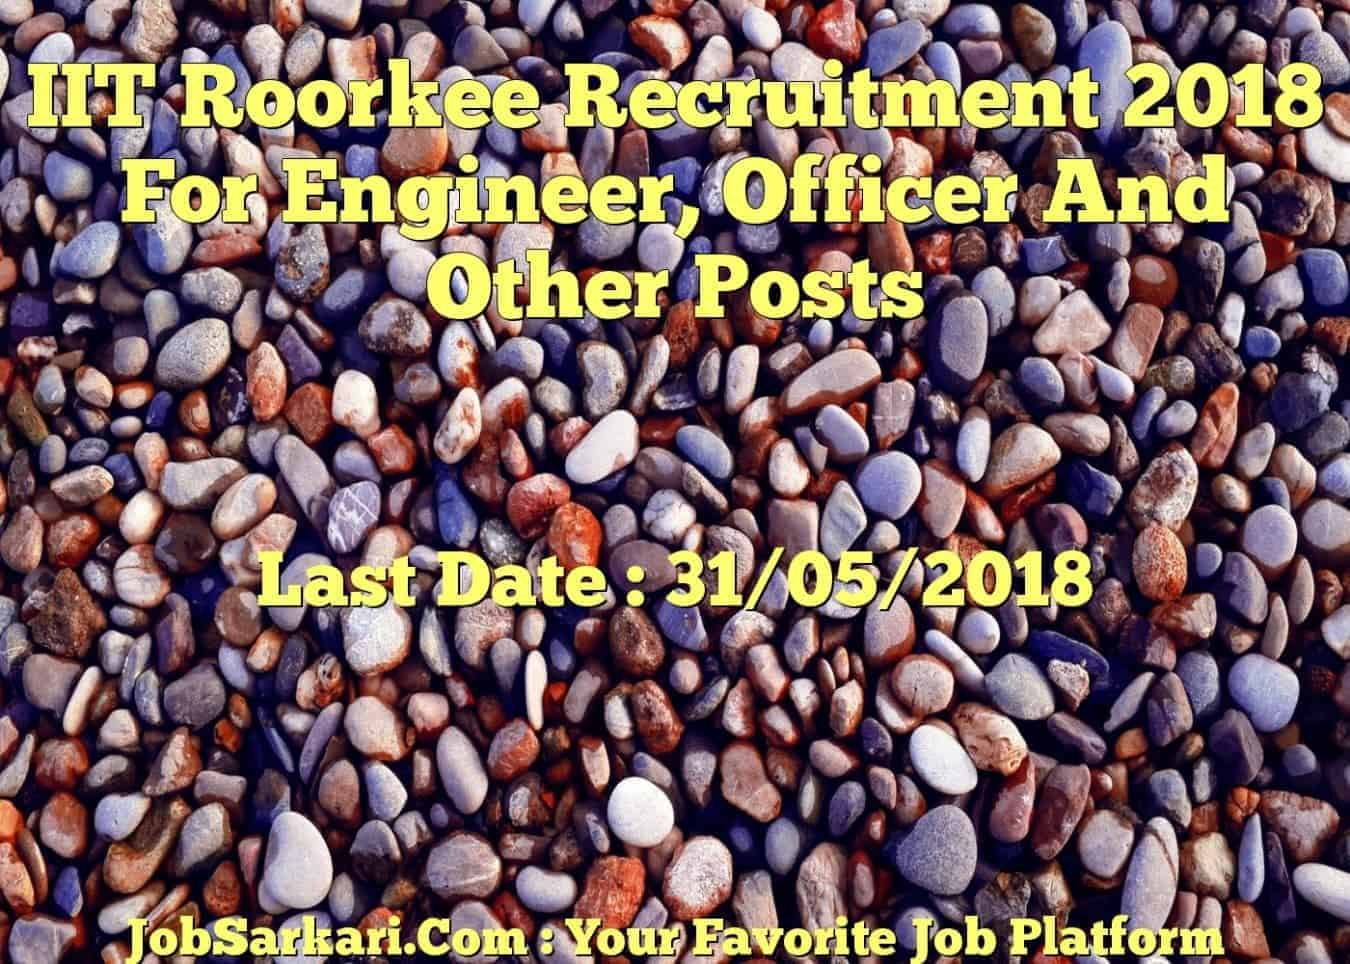 IIT Roorkee Recruitment 2018 For Engineer, Officer And Other Posts